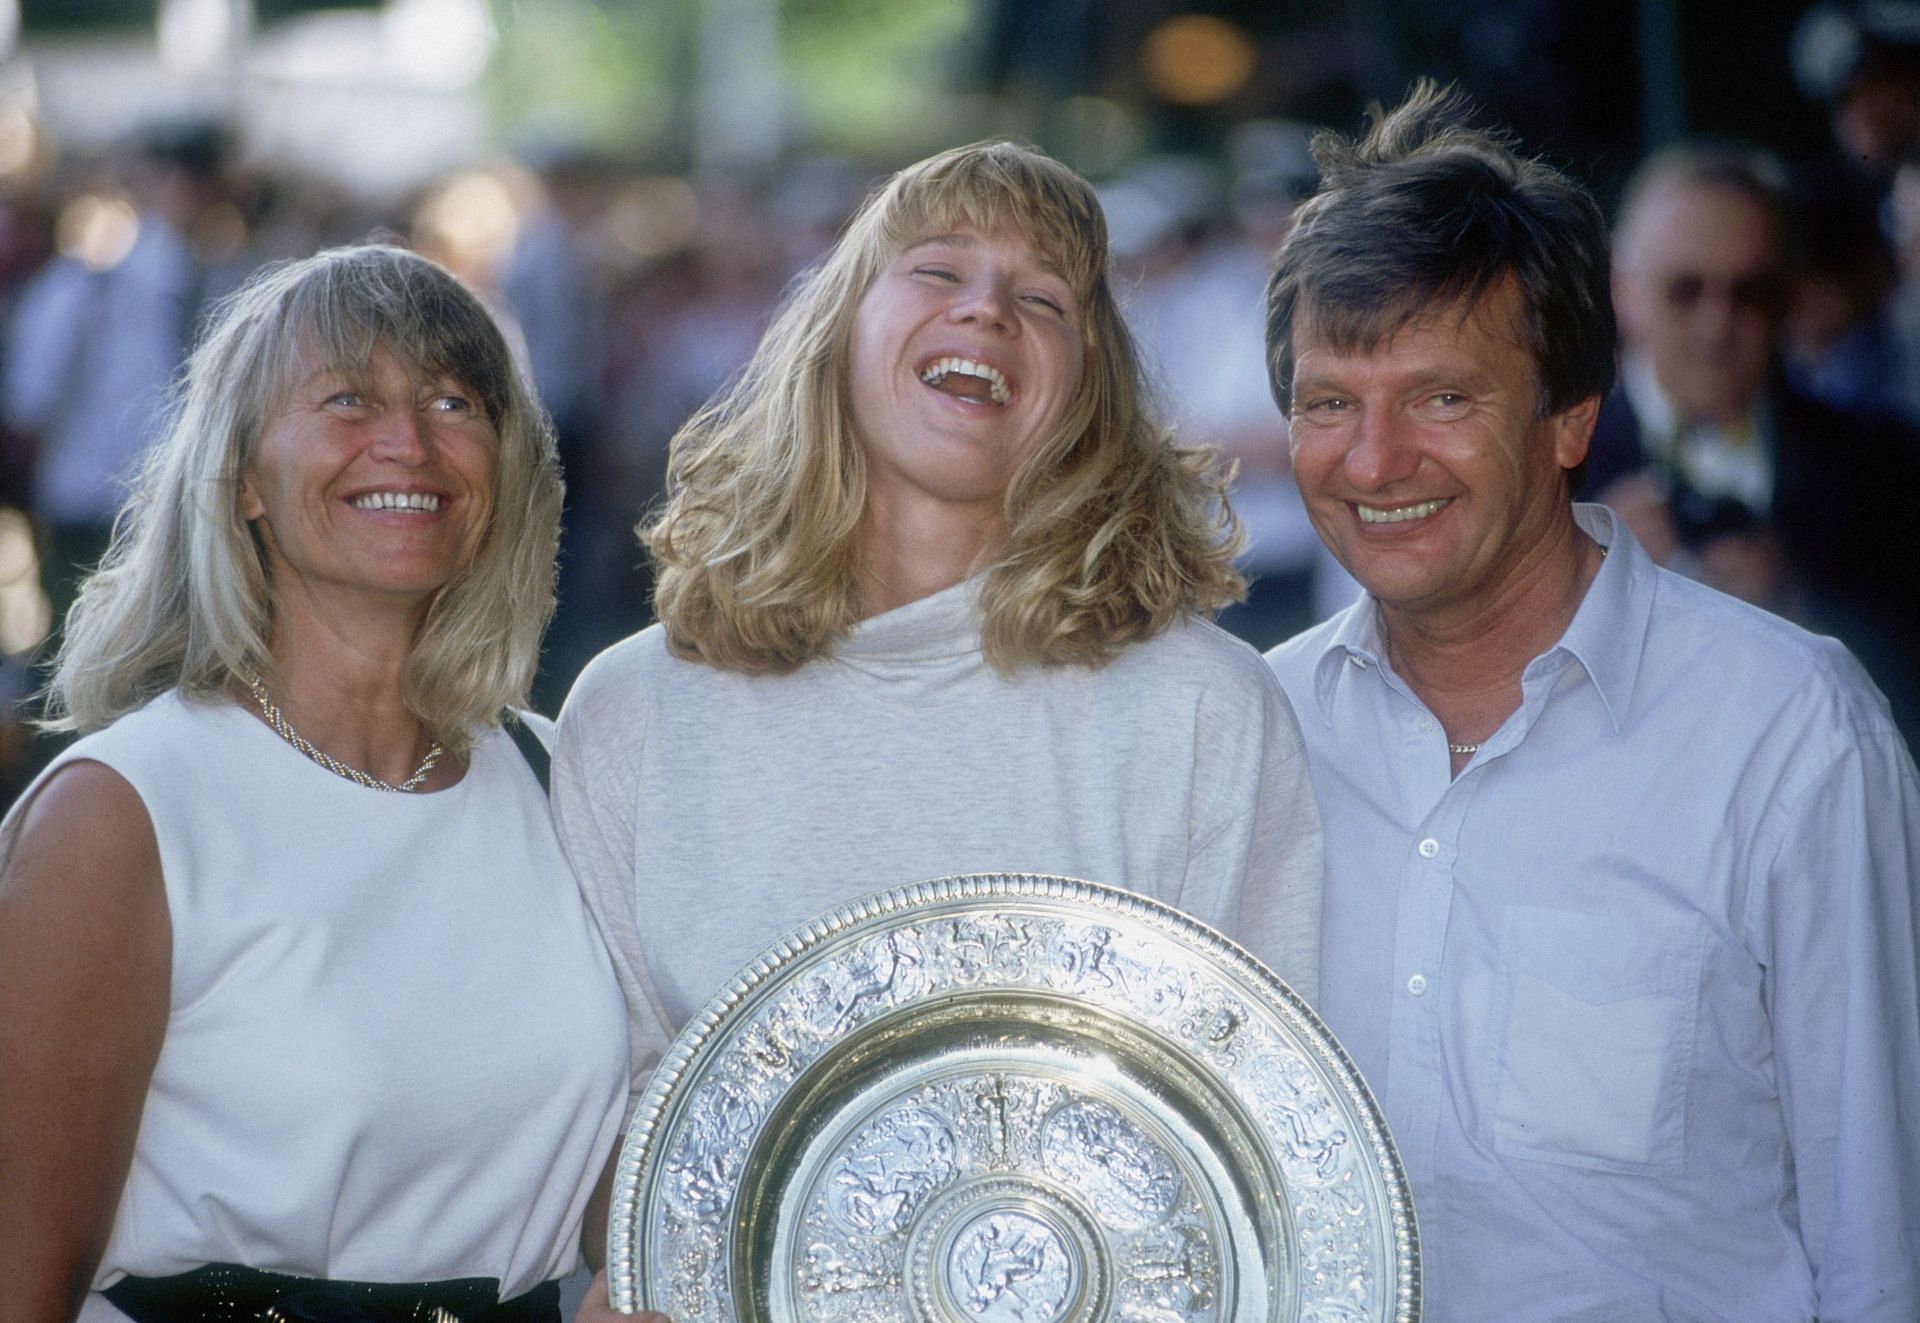 Steffi Graf had a difficult relationship with her father after the paternity scandal